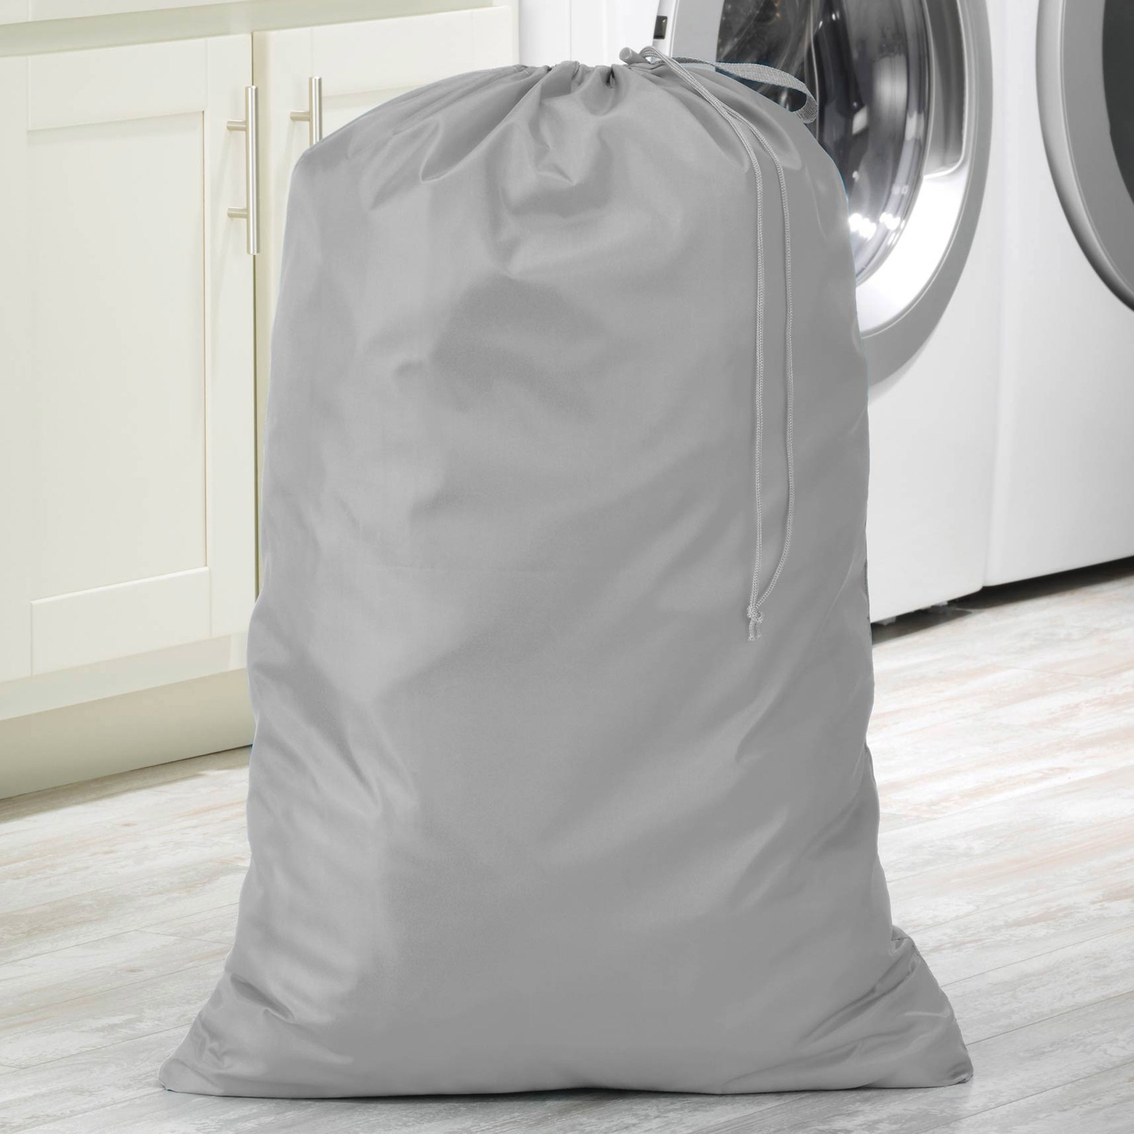 Whitmor Dura Clean Laundry Bag - Image 5 of 7